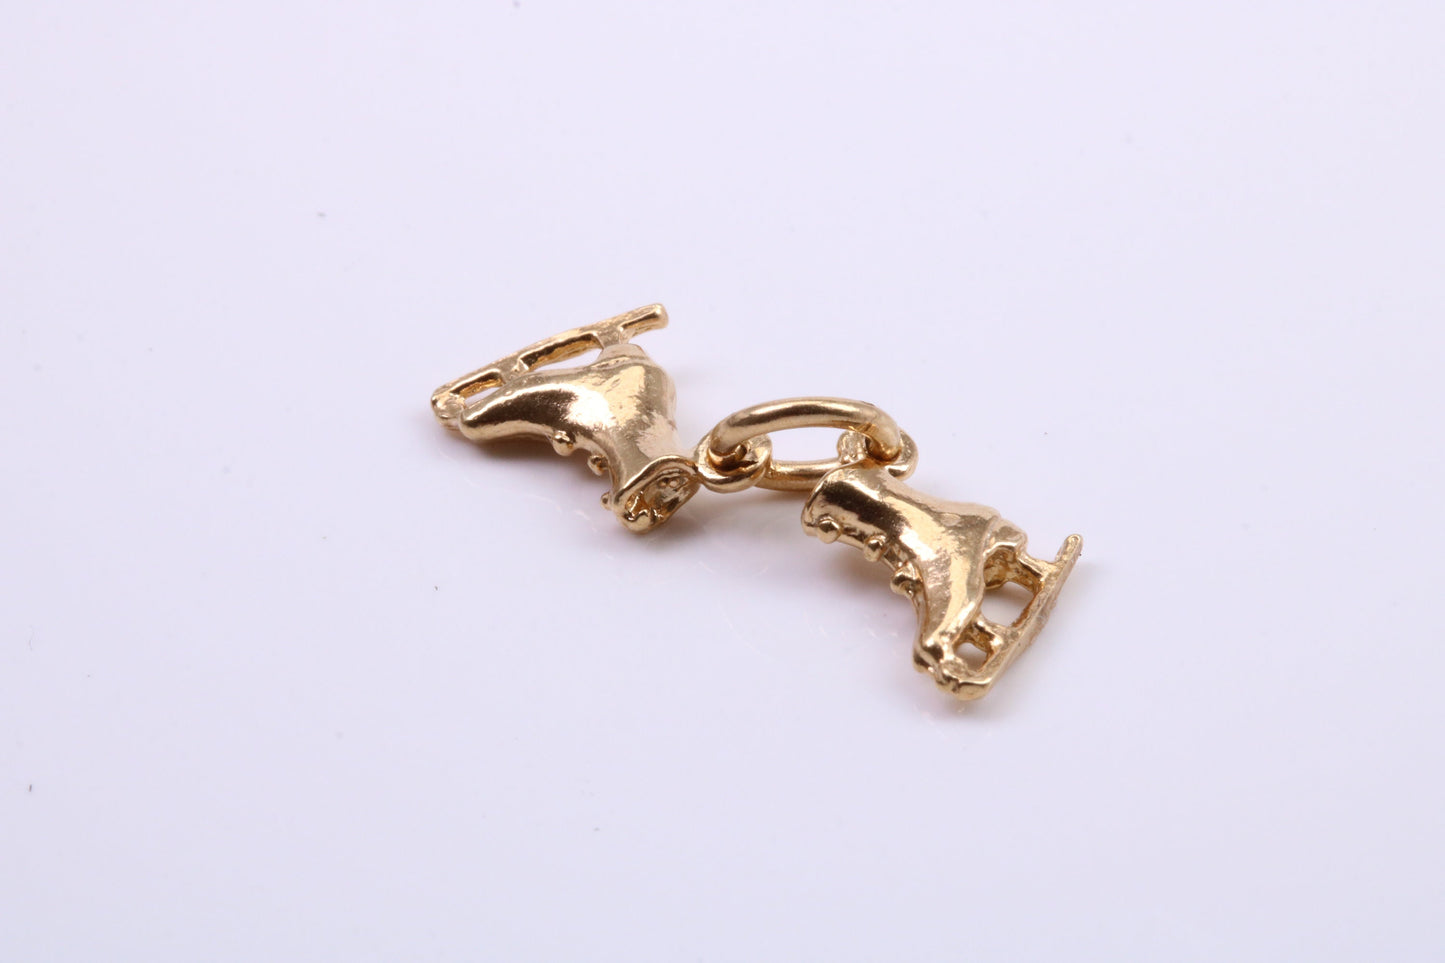 Pair of Ice Skates Charm, Traditional Charm, Made from Solid 9ct Yellow Gold, British Hallmarked, Complete with Attachment Link